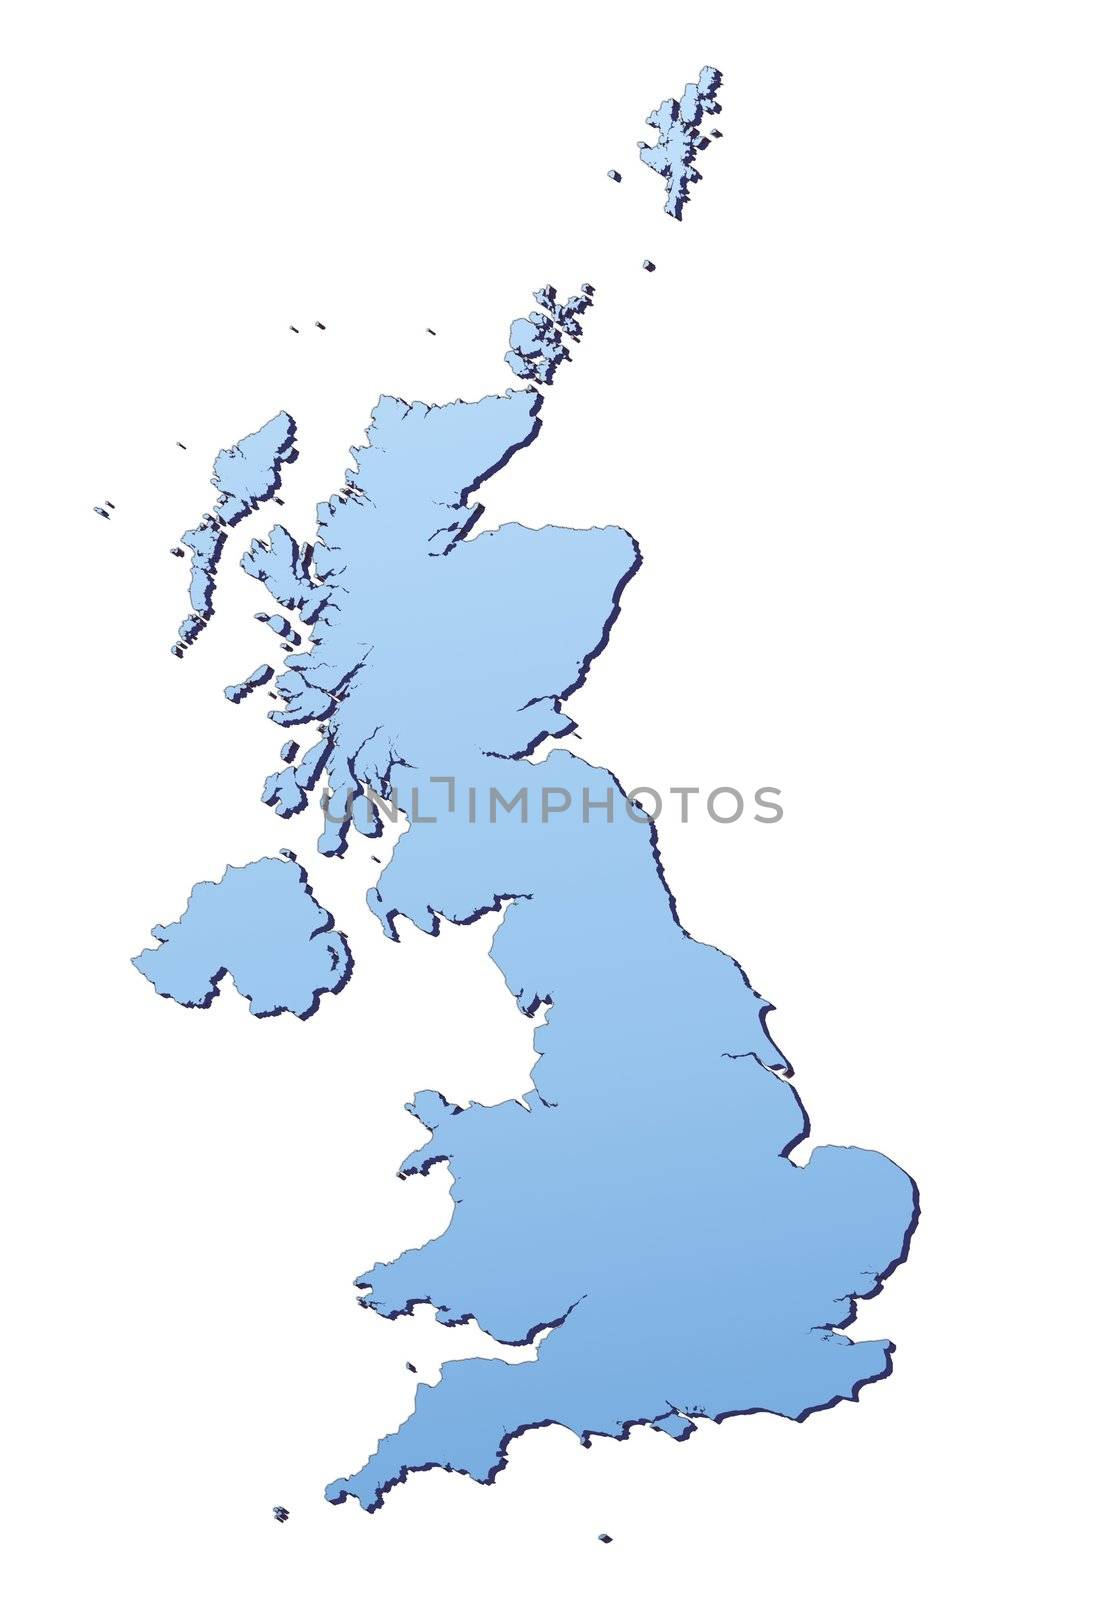 United Kingdom map by skvoor